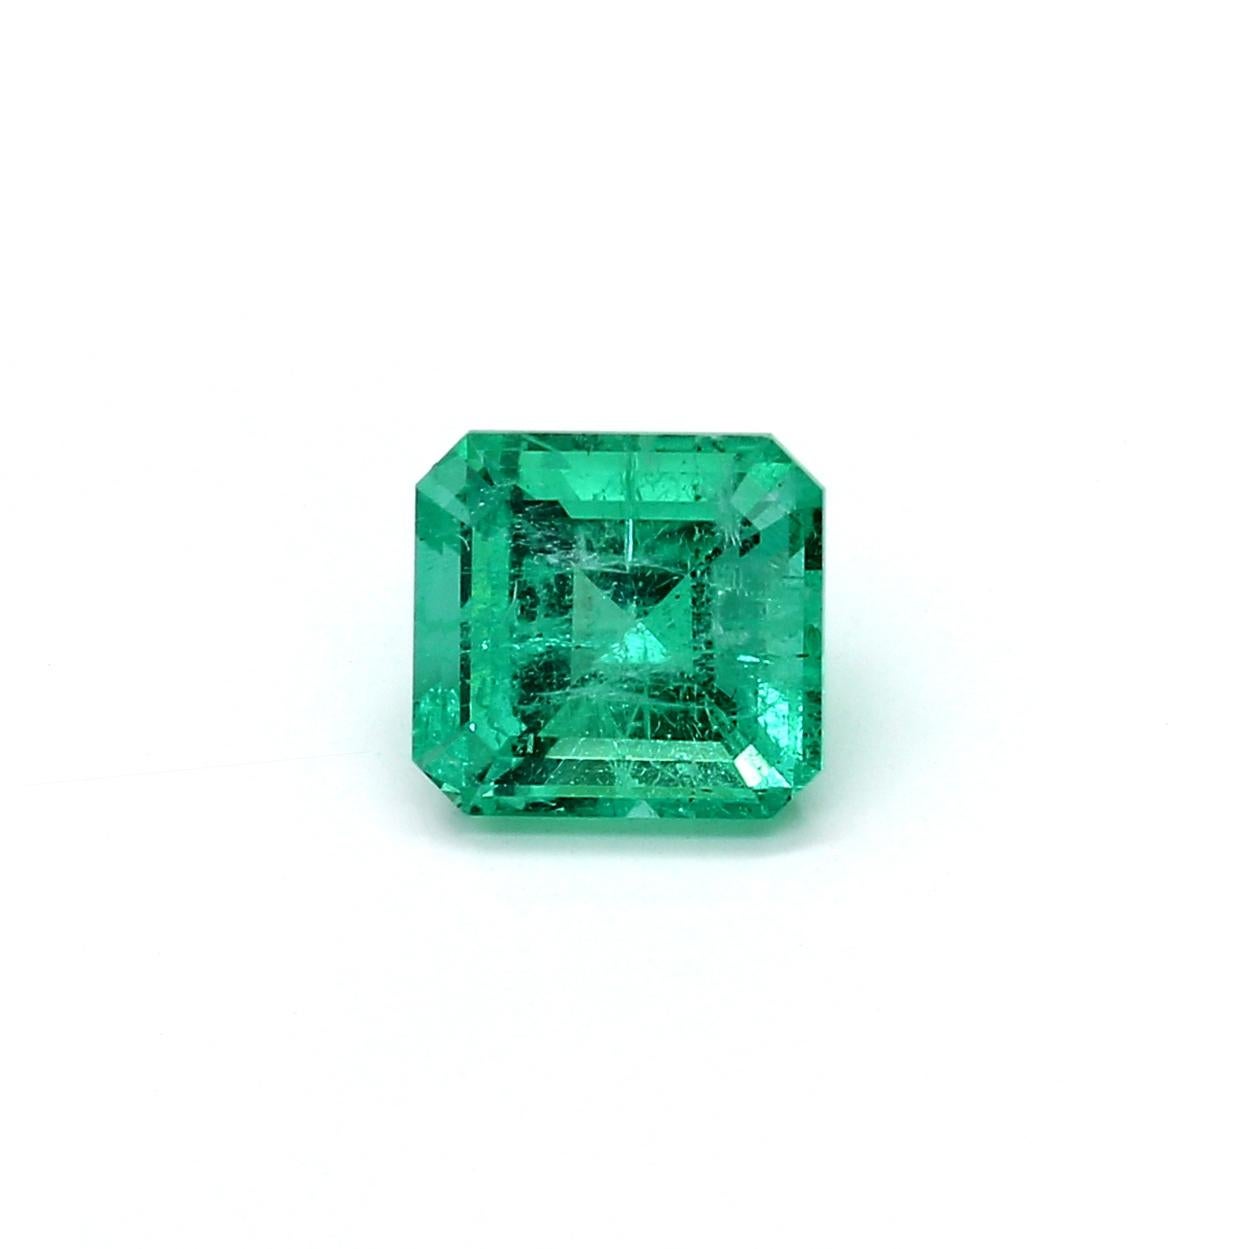 An amazing vivid green 1.56 ct Russian Emerald which allows jewelers to create a unique piece of wearable art.
This exceptional quality gemstone would make a custom-made jewelry design. Perfect for a Ring or Pendant.

Shape - Octagon
Weight - 1.56